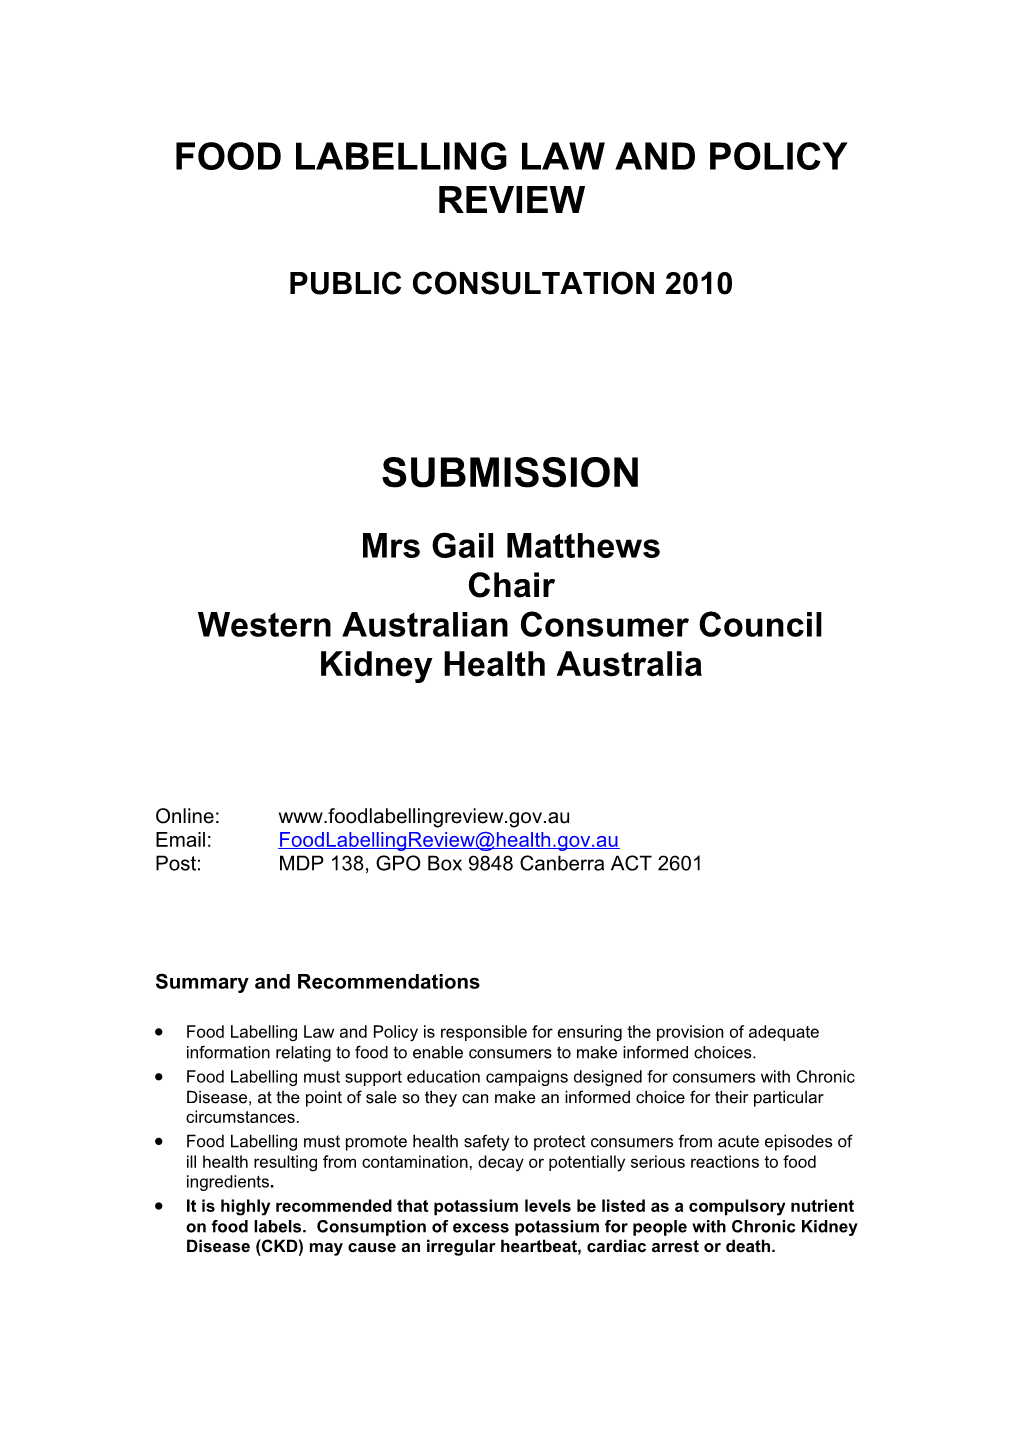 SUBMISSION from WESTERN AUSTRALIA CONSUMER COUNCIL of KIDNEY HEALTH AUSTRALIA